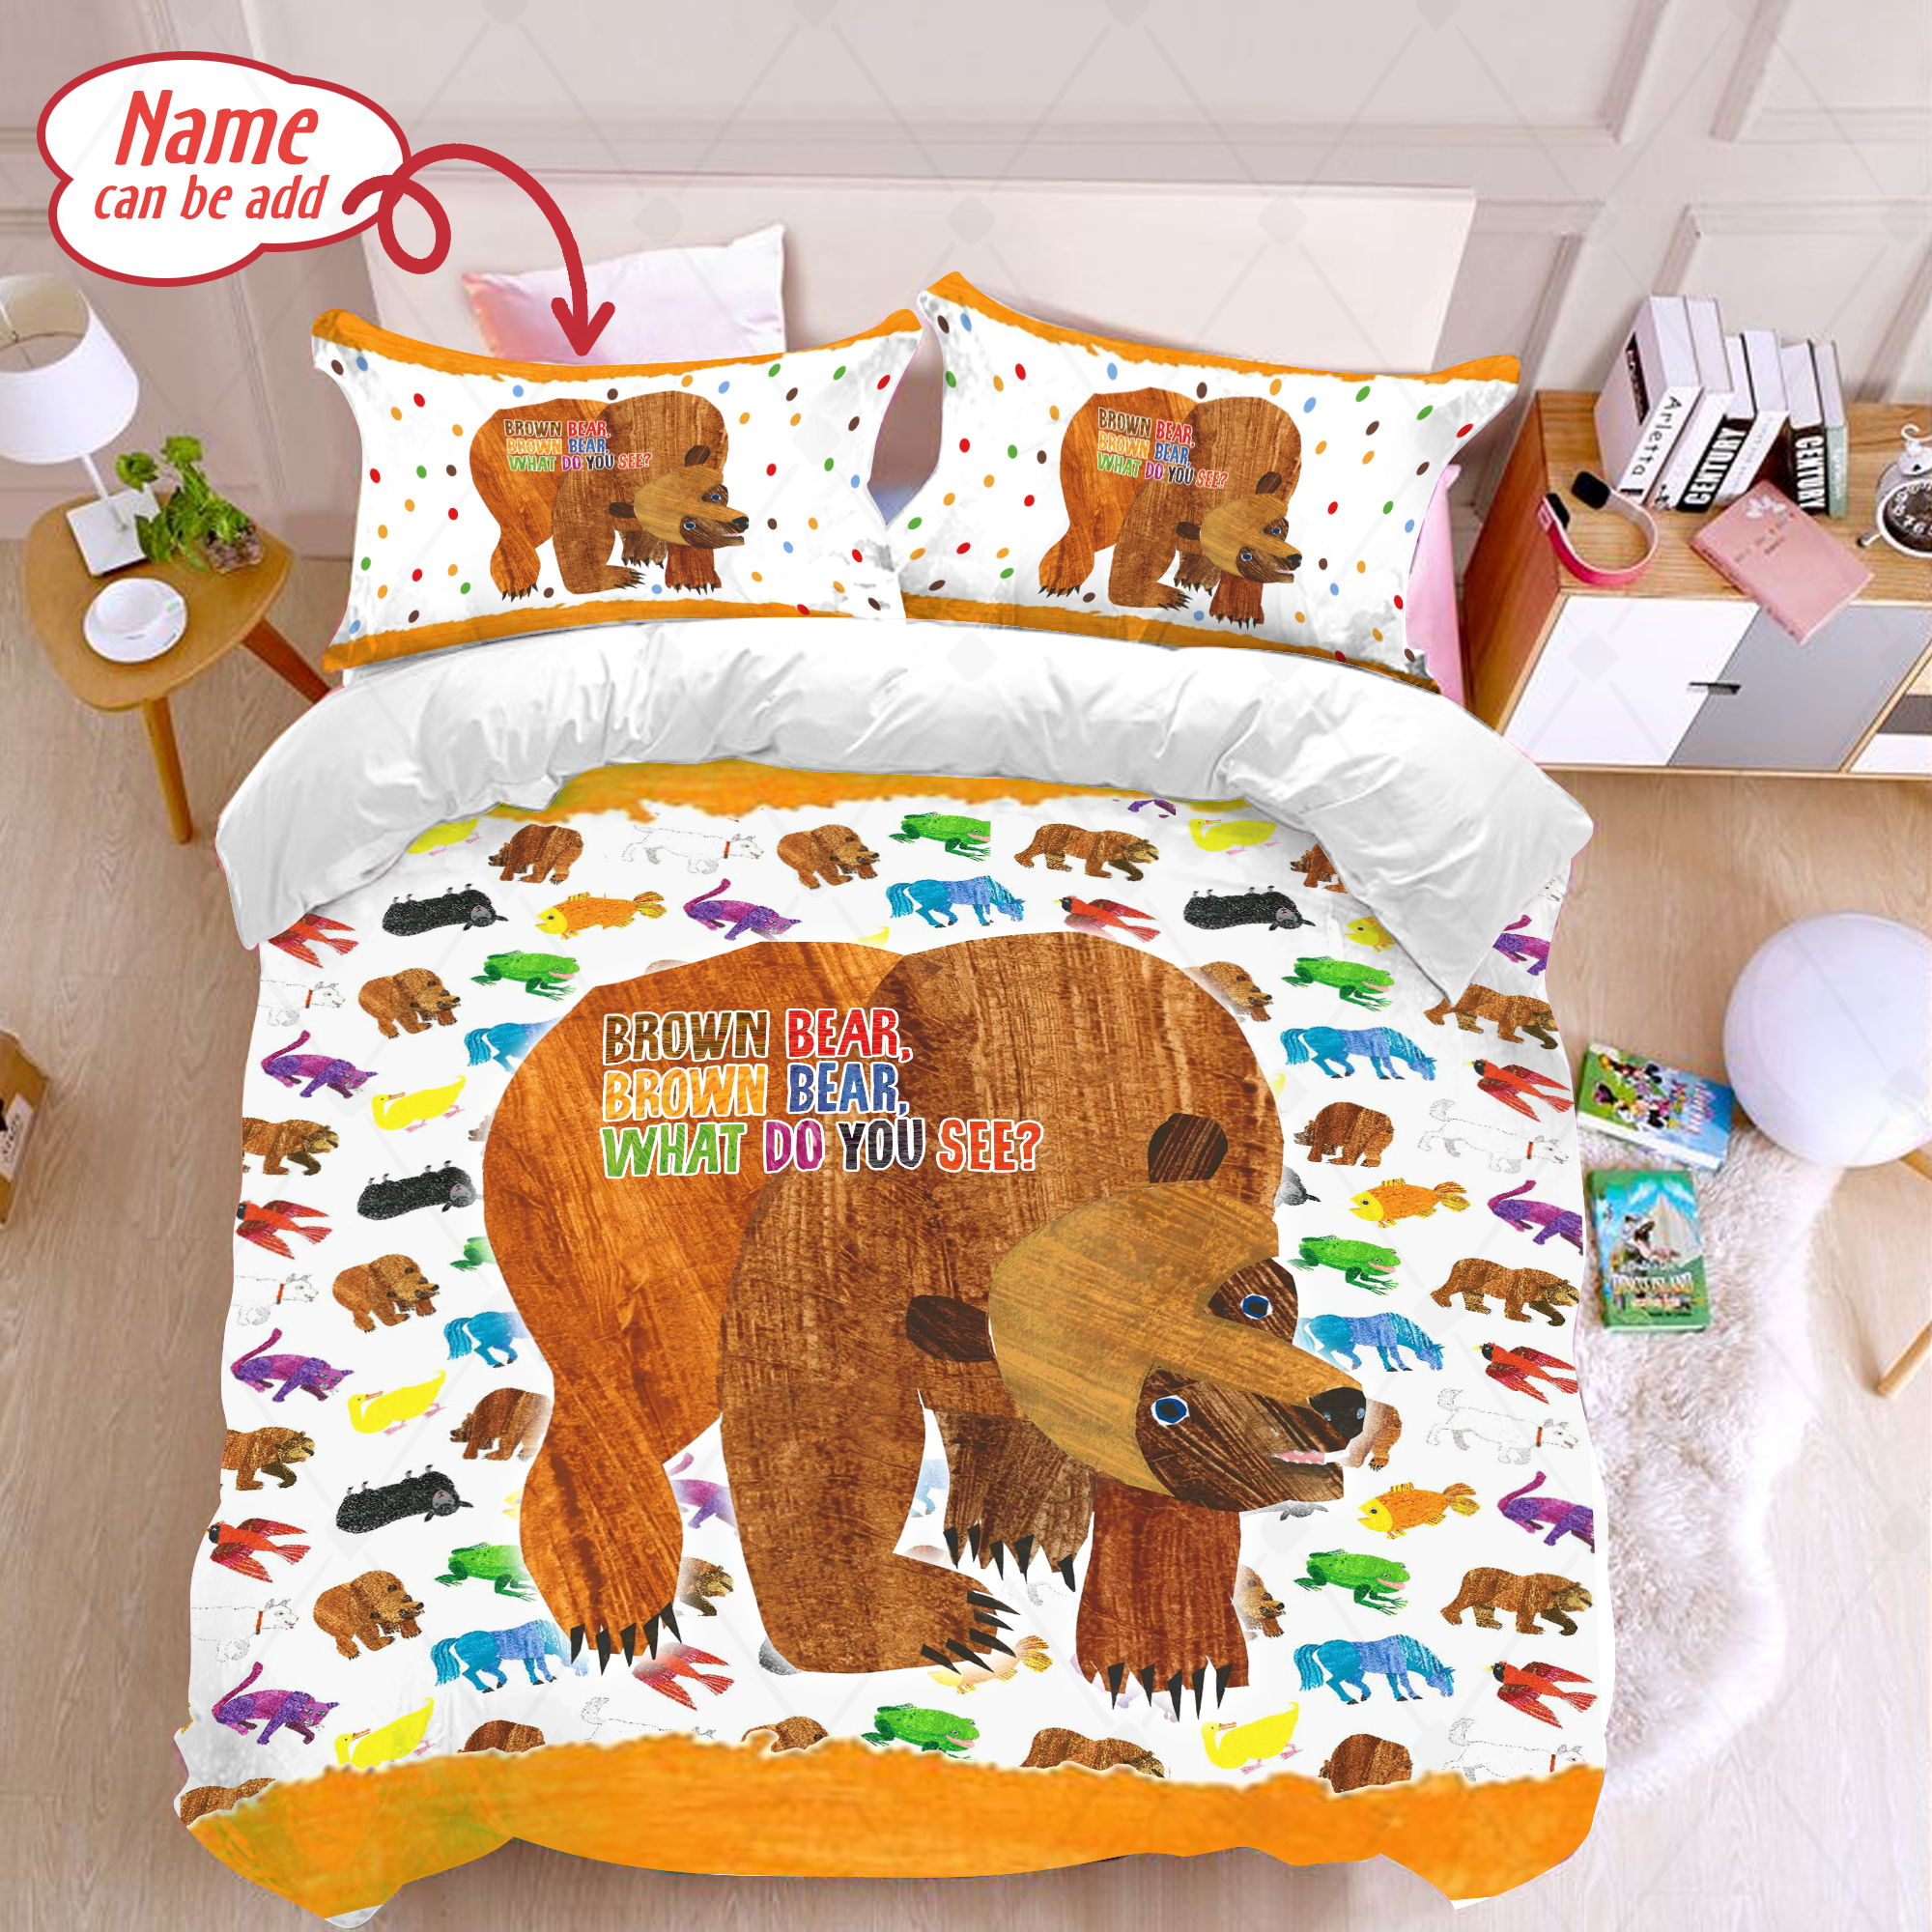 Personalized Eric Brown Bear Bedding Set Brown Bear Duvet Cover And Pillowcase Brown Bear Fleece Blanket Eric Carle Fan Gifts